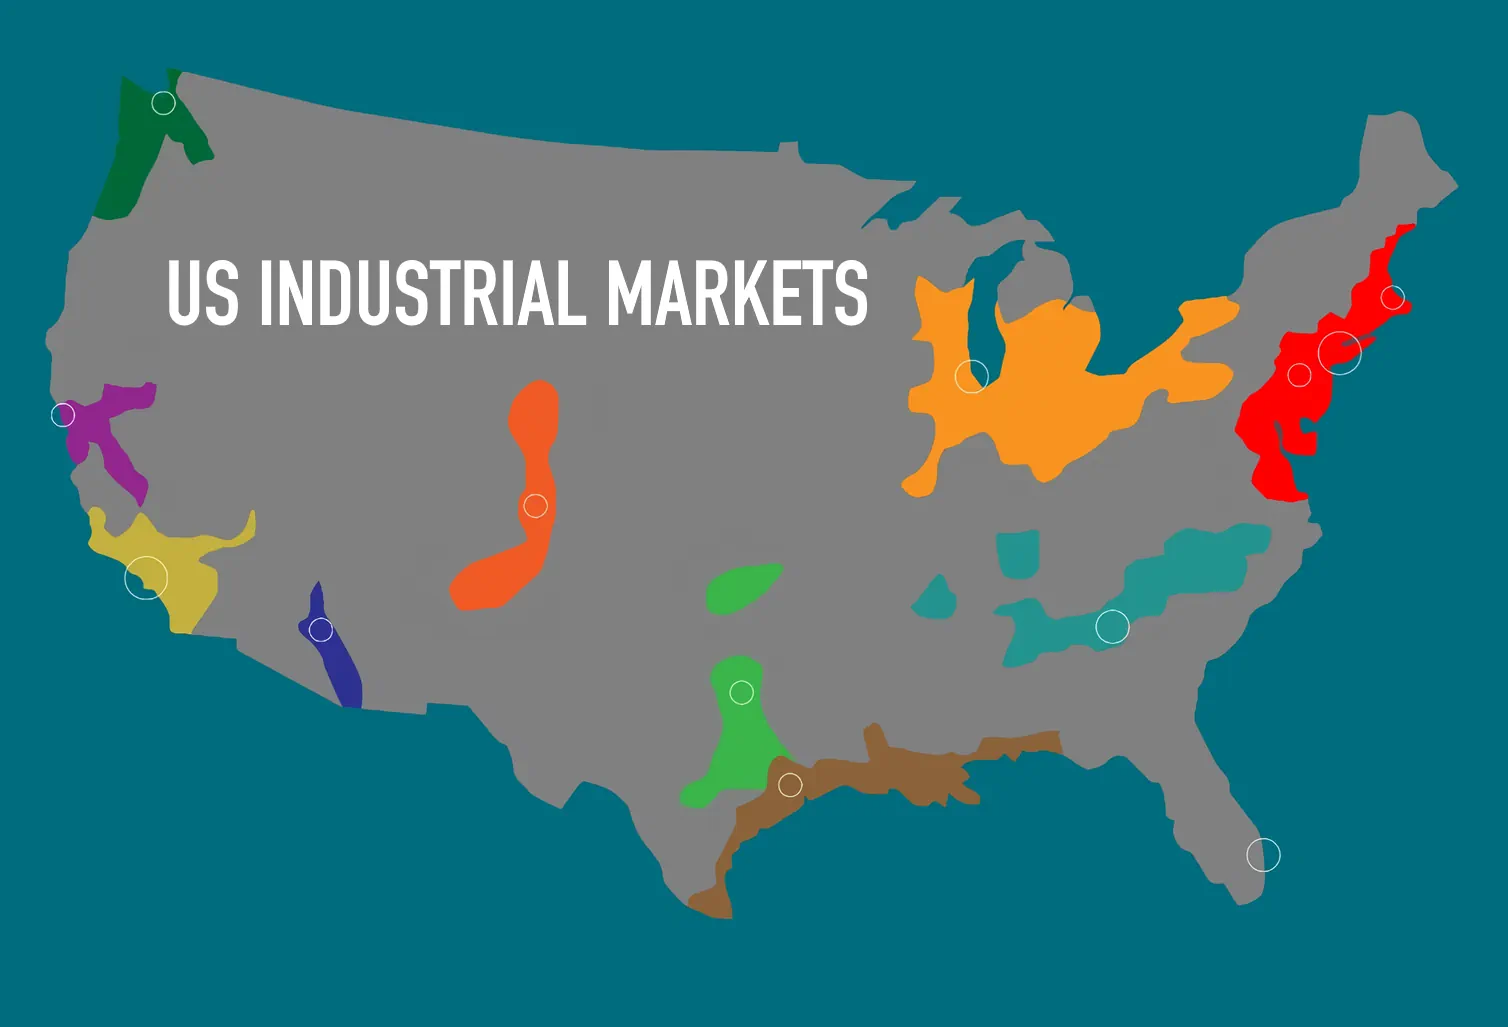 US Industrial Markets marked by different colors depending on market region